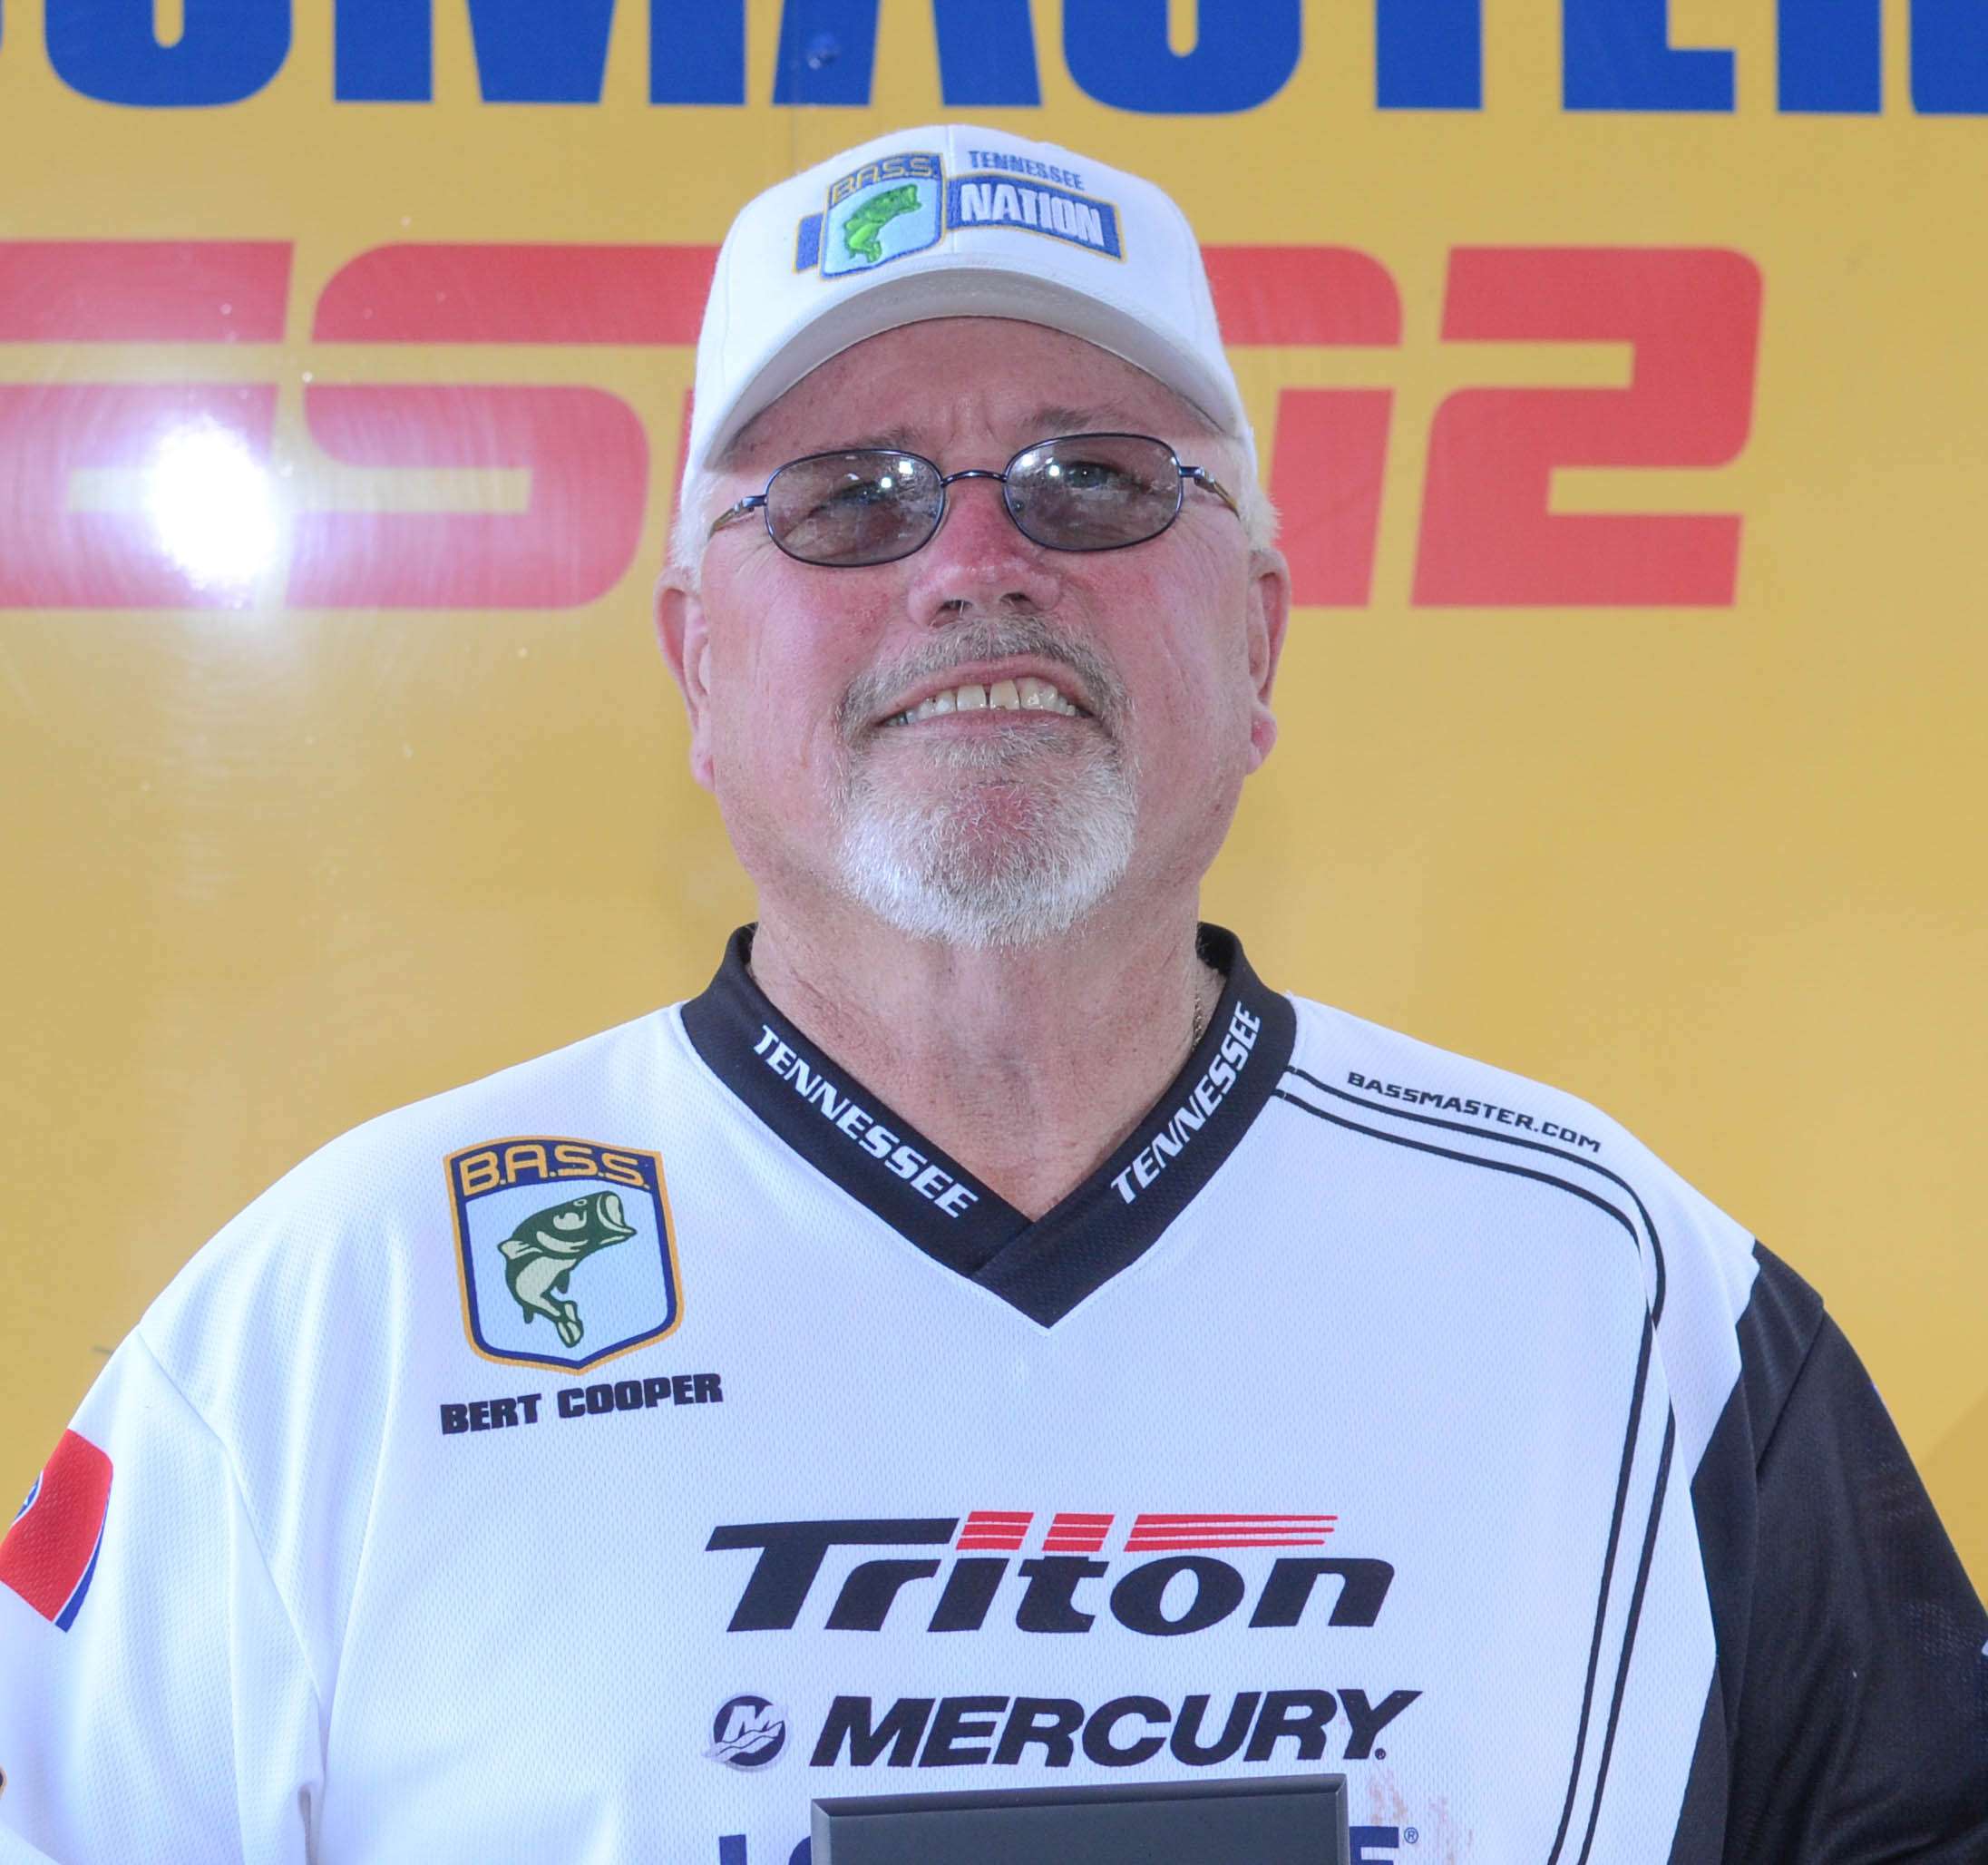 Bert Cooper <br>
Tennessee Nonboater <br>
Bert Cooper is retired, which gives him plenty of time to spend on one of his favorite pastimes, hunting. Heâs a member of the Stones River Bass Anglers, and this will be his first championship.